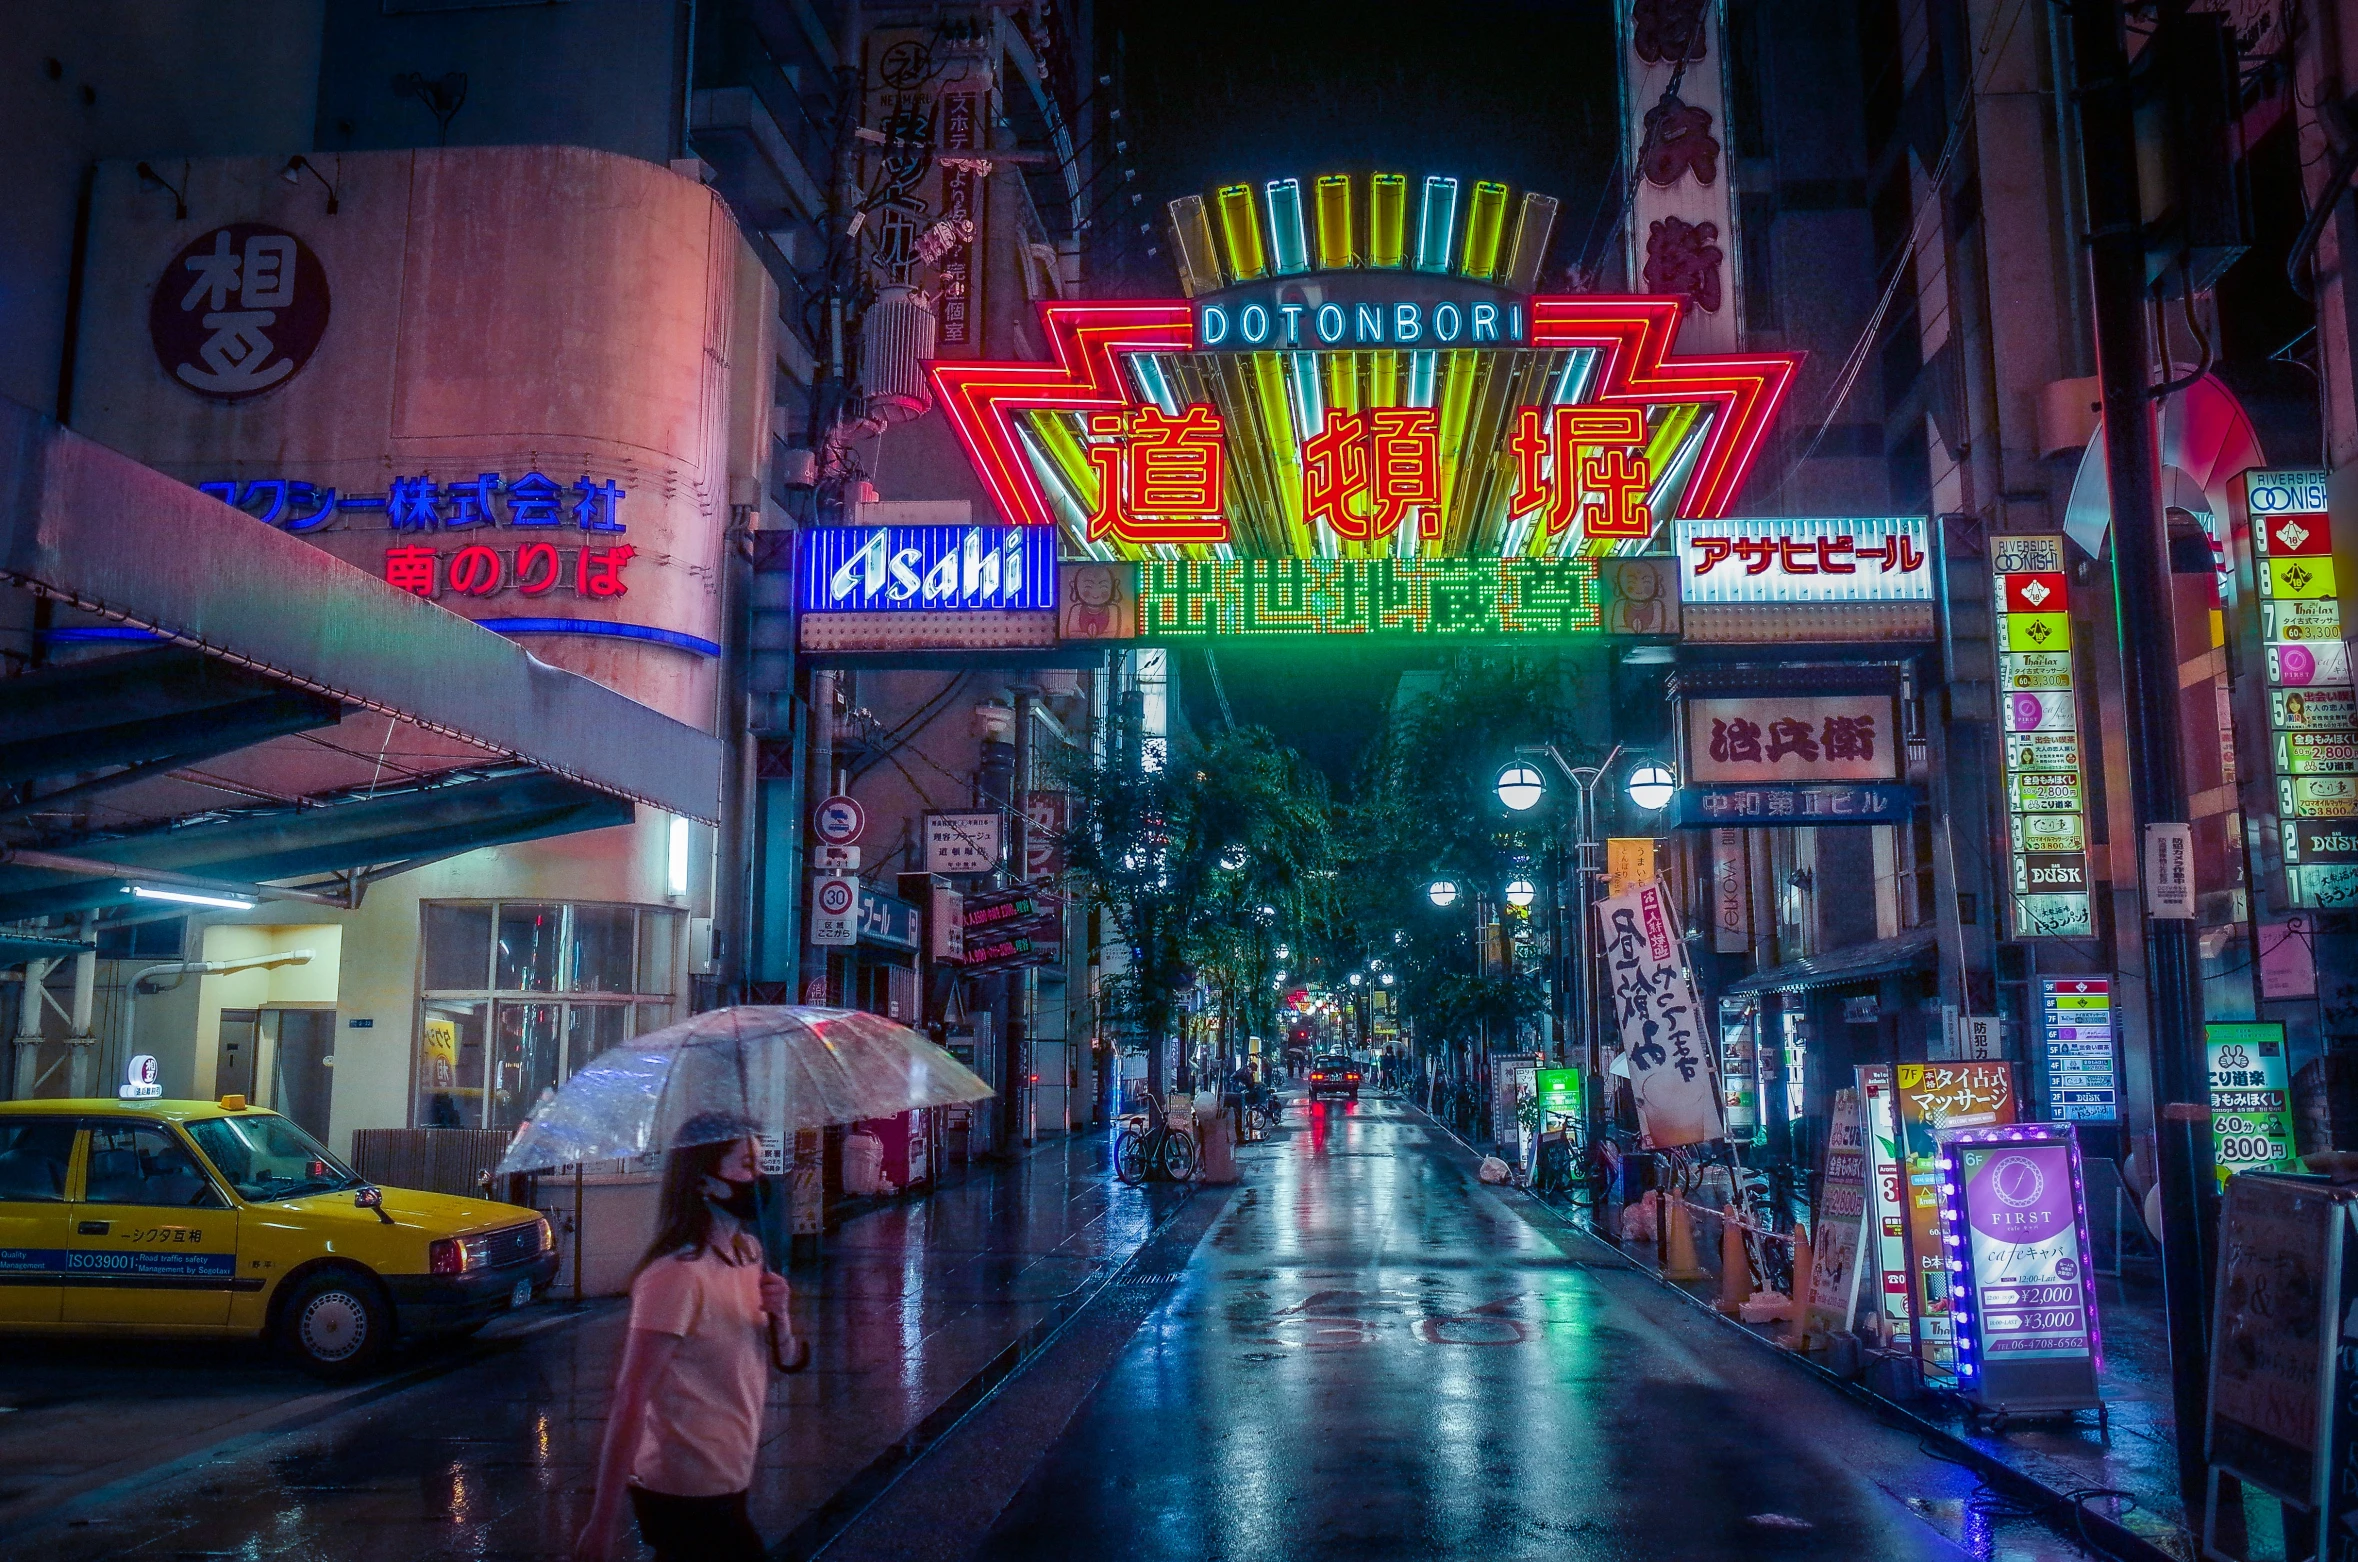 city street with lit neon sign and person walking under an umbrella